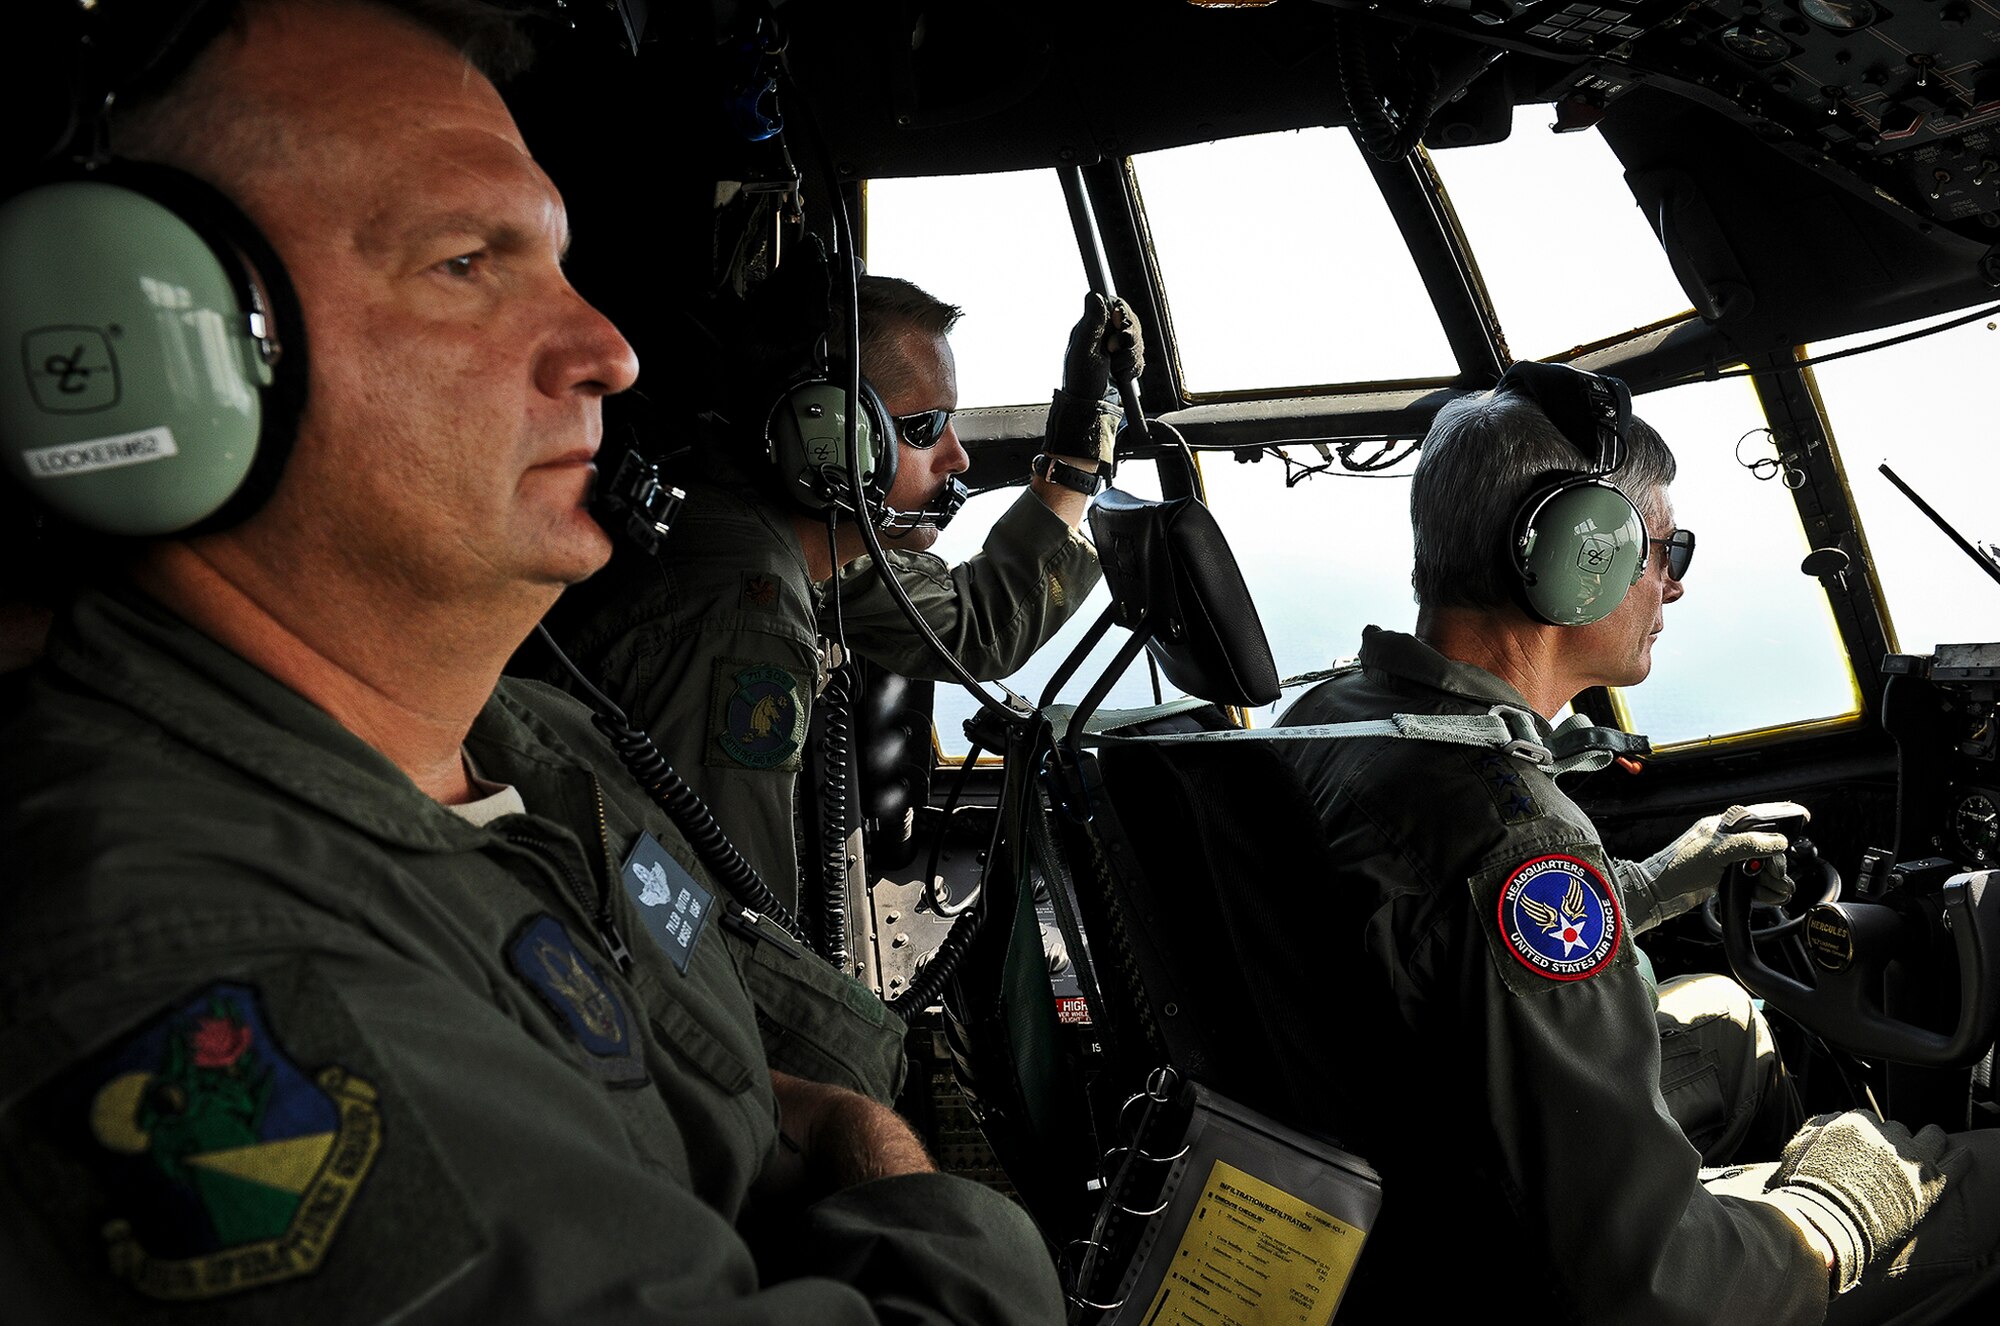 Chief Master Sgt. Tyler Outten and Maj. William Palmatier watch as Air Force Chief of Staff Gen. Norton Schwartz flies an MC-130E Combat Talon I July 12, 2012, during his last flight as an active duty officer. The MC-130E Combat Talon I crew conducted a local training sortie during the mission that also served as Schwartz’s “fini flight” in the Air Force. Outten and Palmatier are reservists with the 919th Special Operations Wing. (U.S. Air Force photo/Tech. Sgt. Samuel King Jr.)
